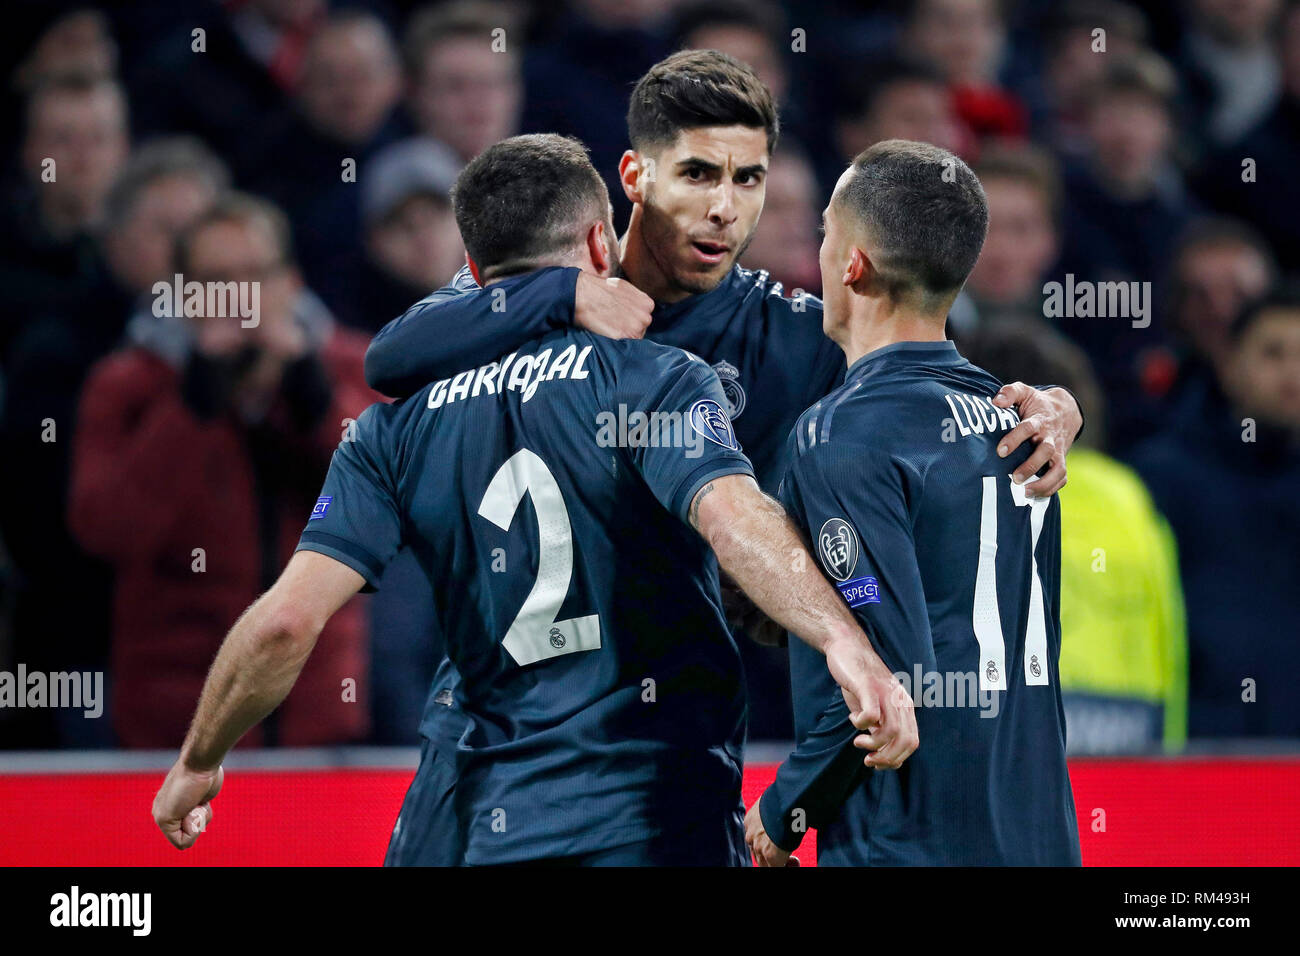 Amsterdam, Netherlands. 13th Feb, 2019. AMSTERDAM, Ajax - Real Madrid, football, Champions League Season 2018/2019, 13-02-2019, Johan Cruijff Arena. Real Madrid player Marco Asensio (C) celebrating his 1-2 with Real Madrid player Dani Carvajal (L) and Real Madrid player Lucas Vazquez (R) during the game Ajax - Real Madrid (1-2). Credit: Pro Shots/Alamy Live News Stock Photo